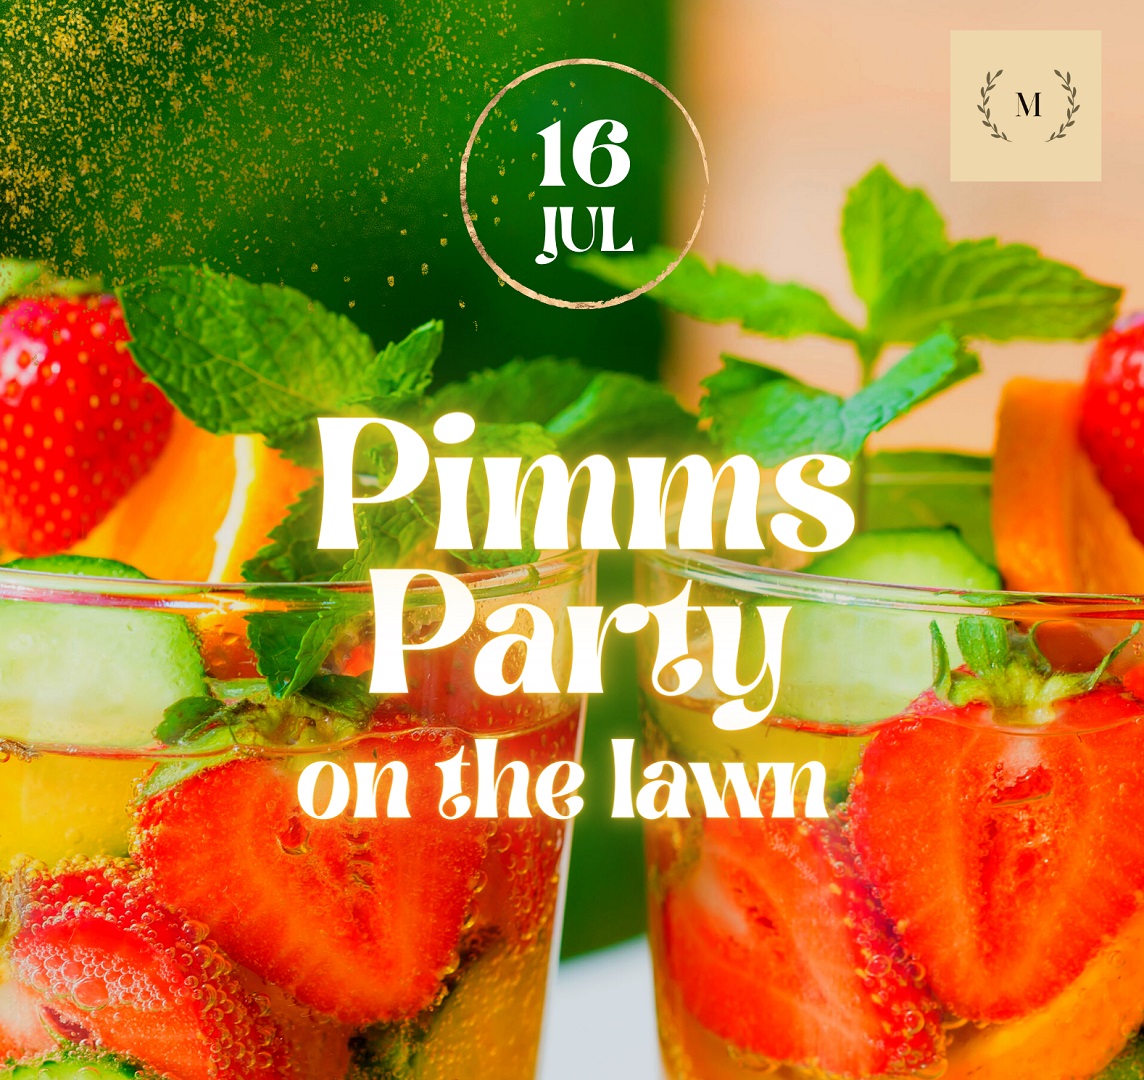 🍹Pimms Party on the Lawn

📅 16 Jul

The Makeney Hall Hotel is  lucky to have such amazing outdoor space, so why don’t you join them for Pimms & Afternoon Tea?

Find out more here ⬇️
ow.ly/hFqh50OzcyO

#DerbyUK